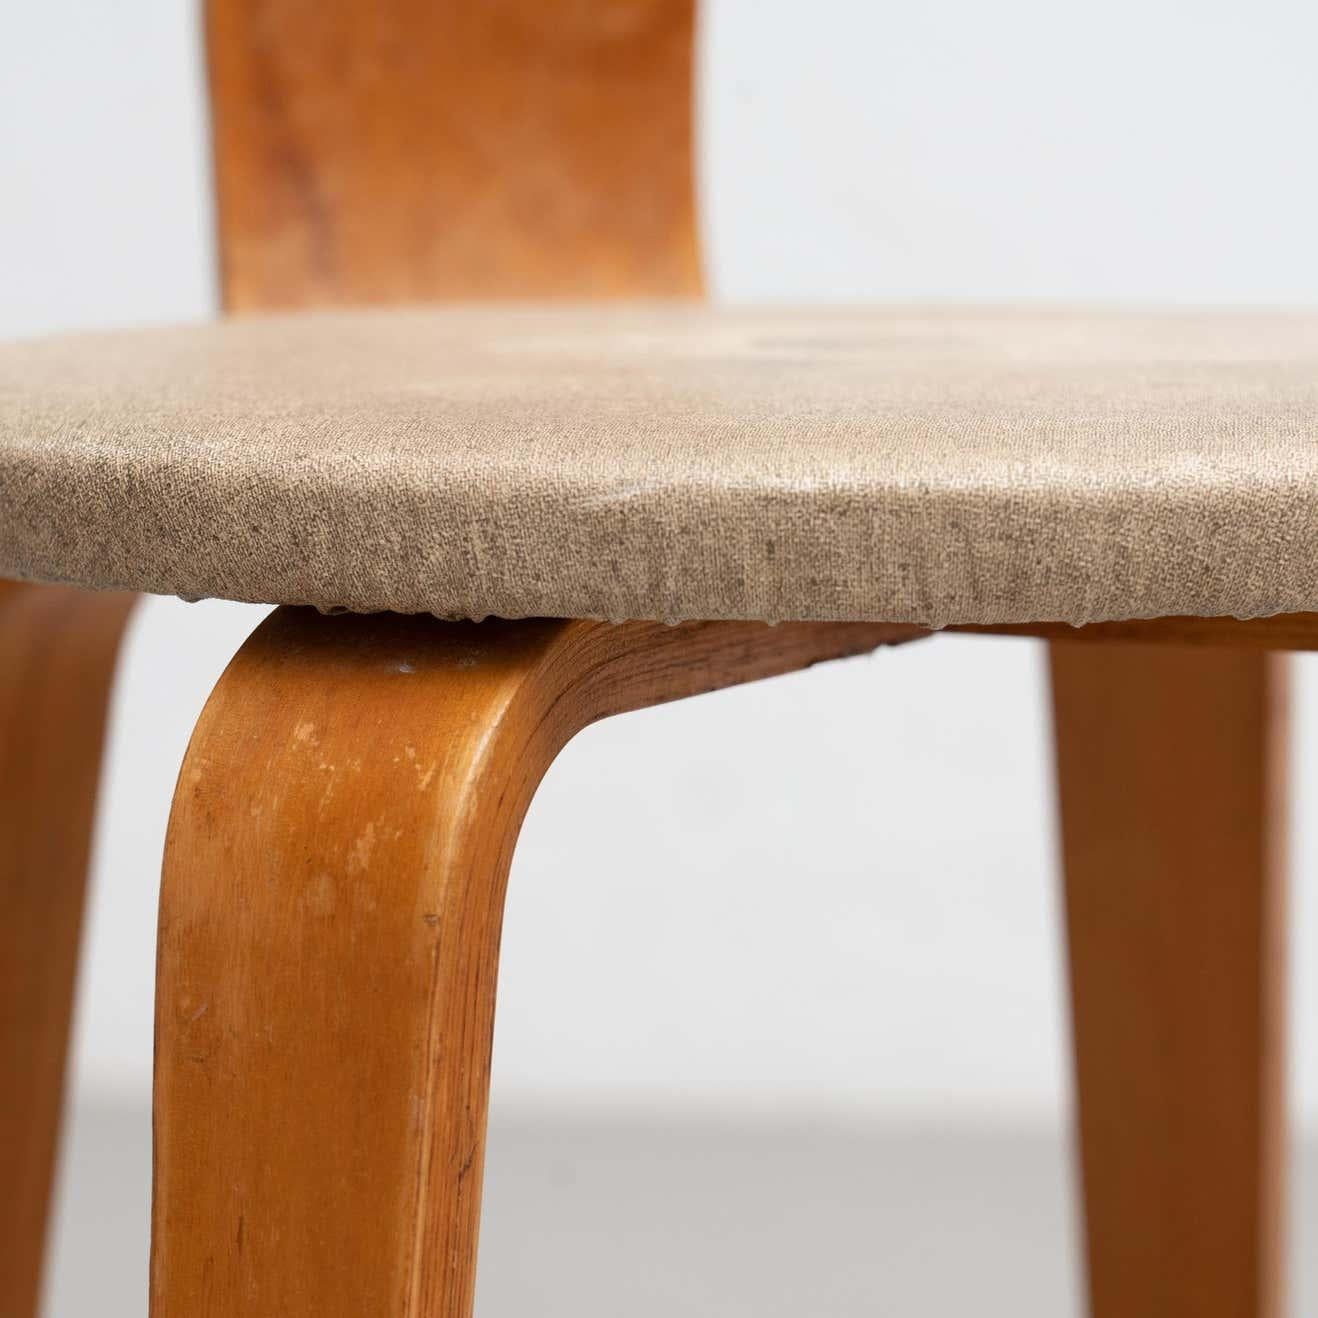 Set of chair and stool designed by Cor Alons, circa 1950.

Manufactured by Den Boer Gouda, (Netherlands), circa 1950.

Laminated Birchwood plywood and original upholstery.

Materials:
Wood
Upholstery

Measurements:
Chair: 70 H 44 W 33